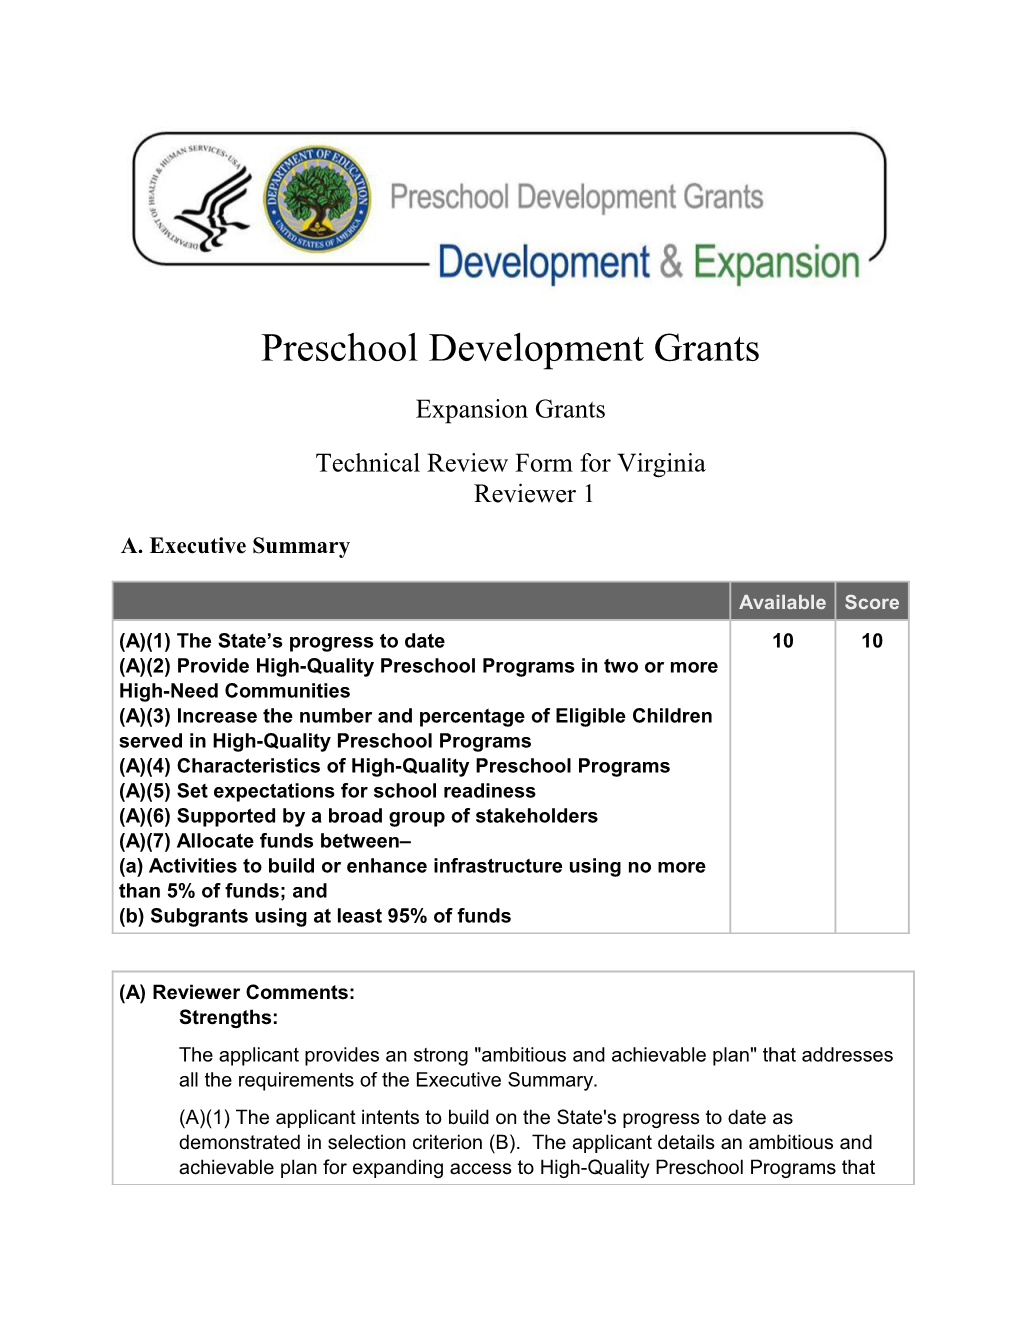 Virginia Reviewer Comments PDG 2014 (MS Word)